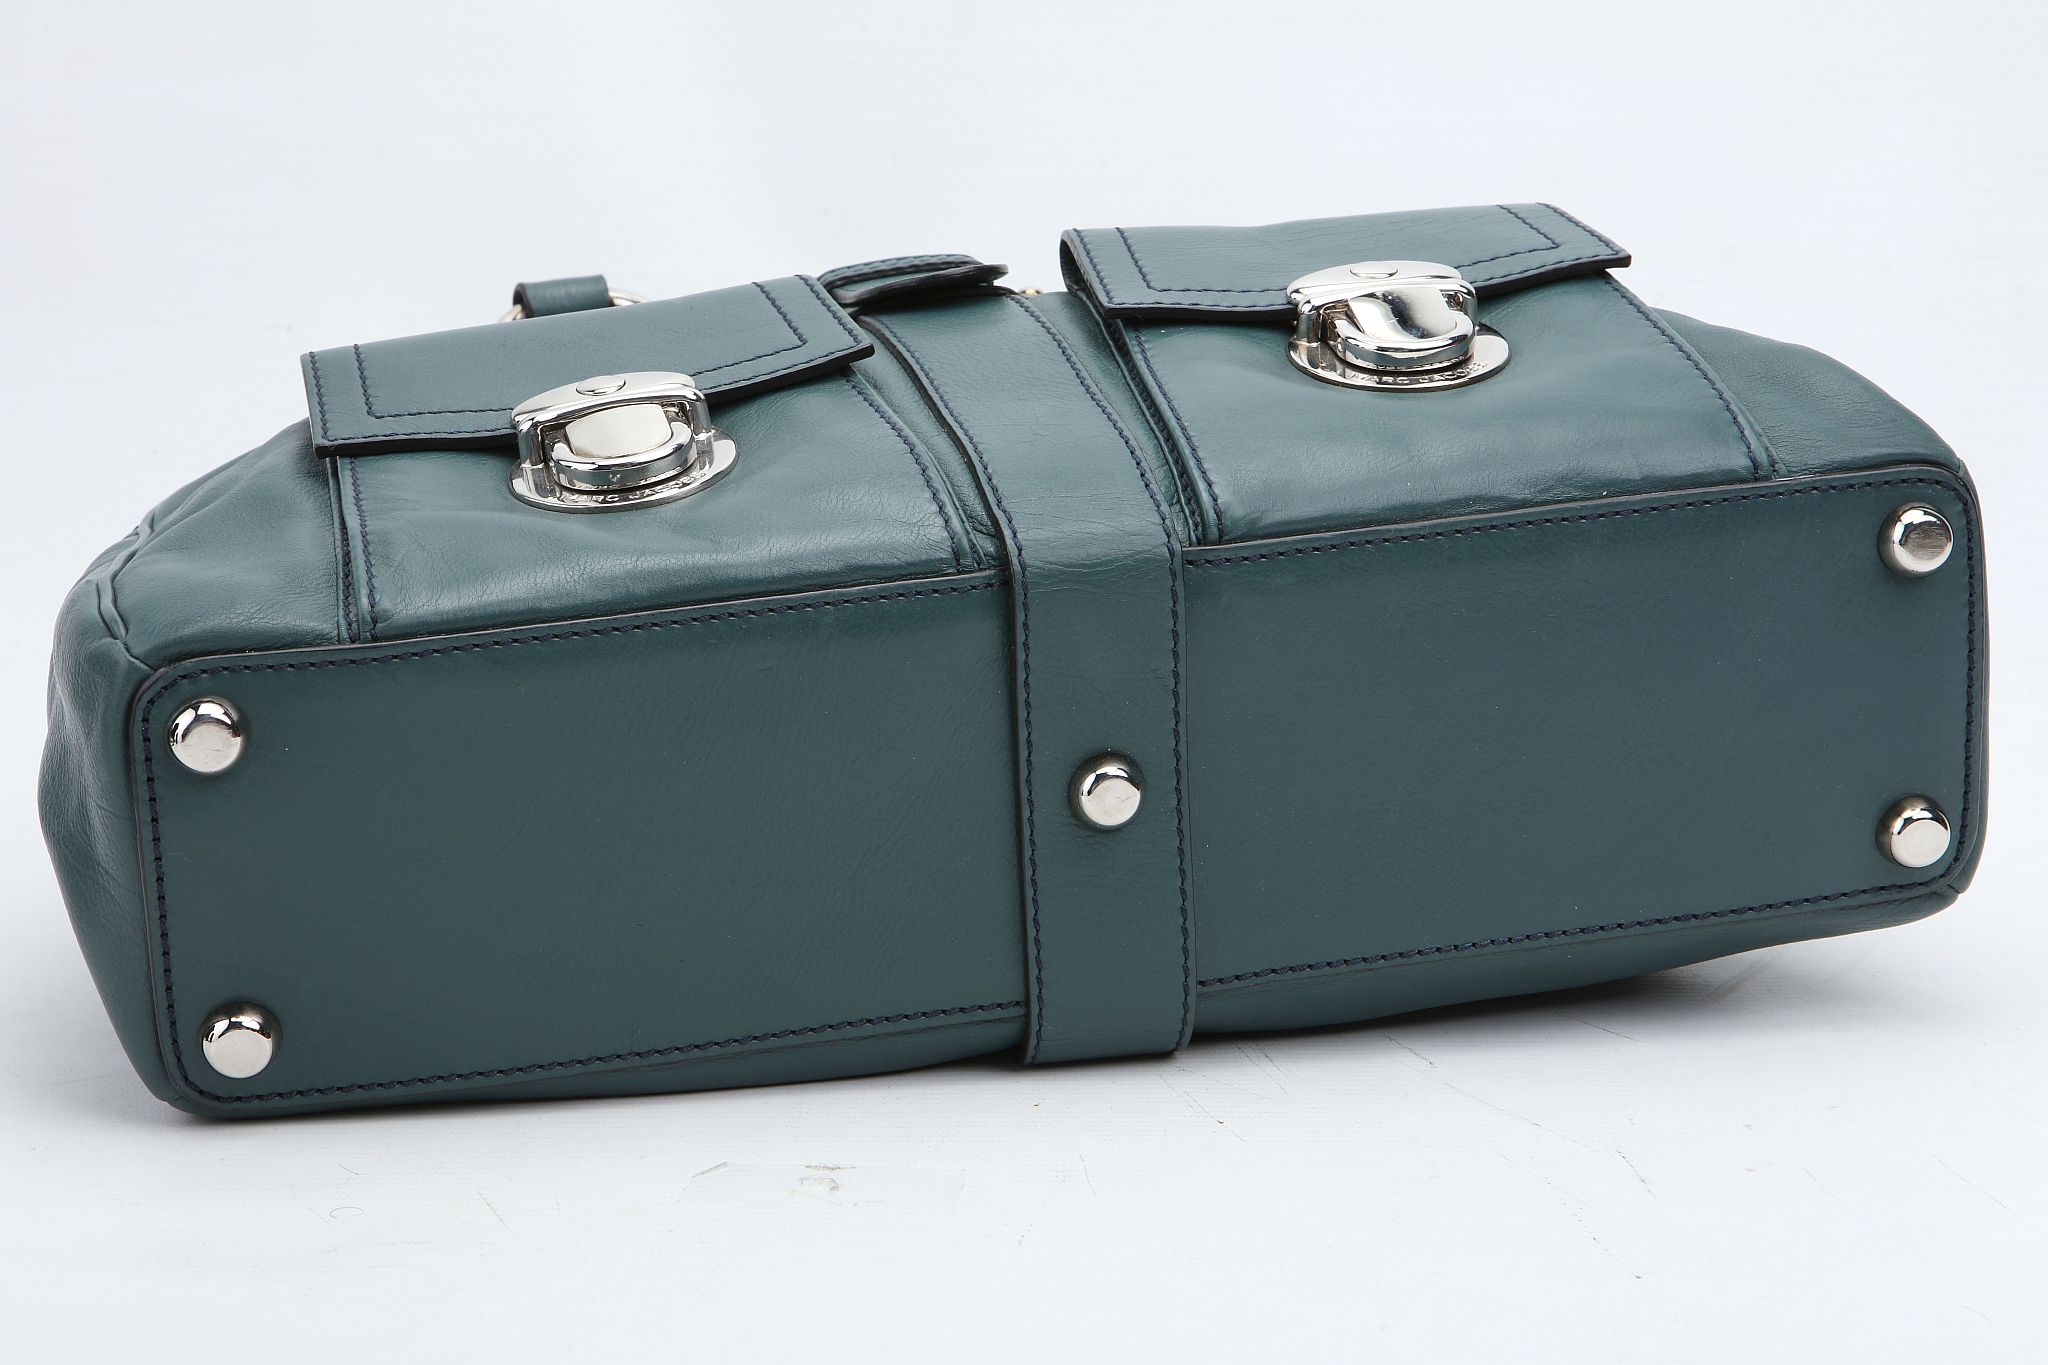 MARC JACOBS VENETIA HANDBAG, teal leather with silver hardware, 38cm wide, 23cm high, with dust bag - Image 6 of 12